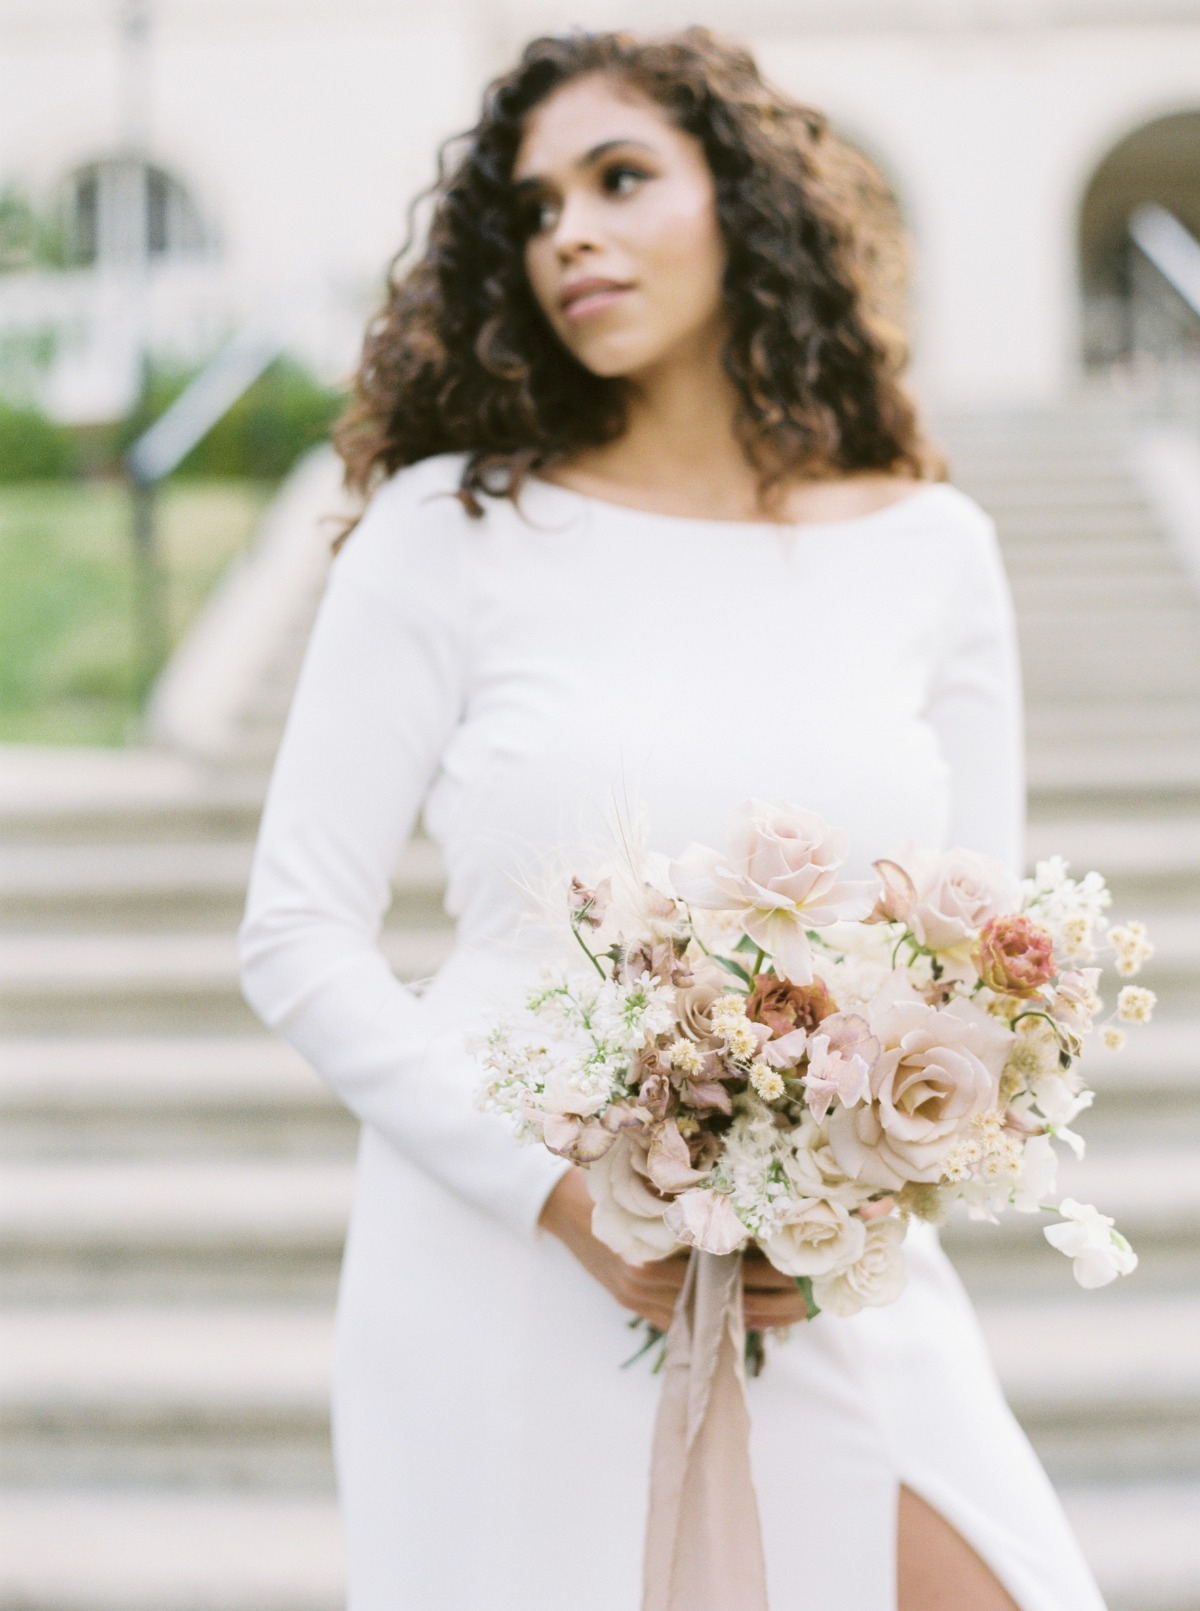 How To Have A Modern Romance Wedding in Black + Blush